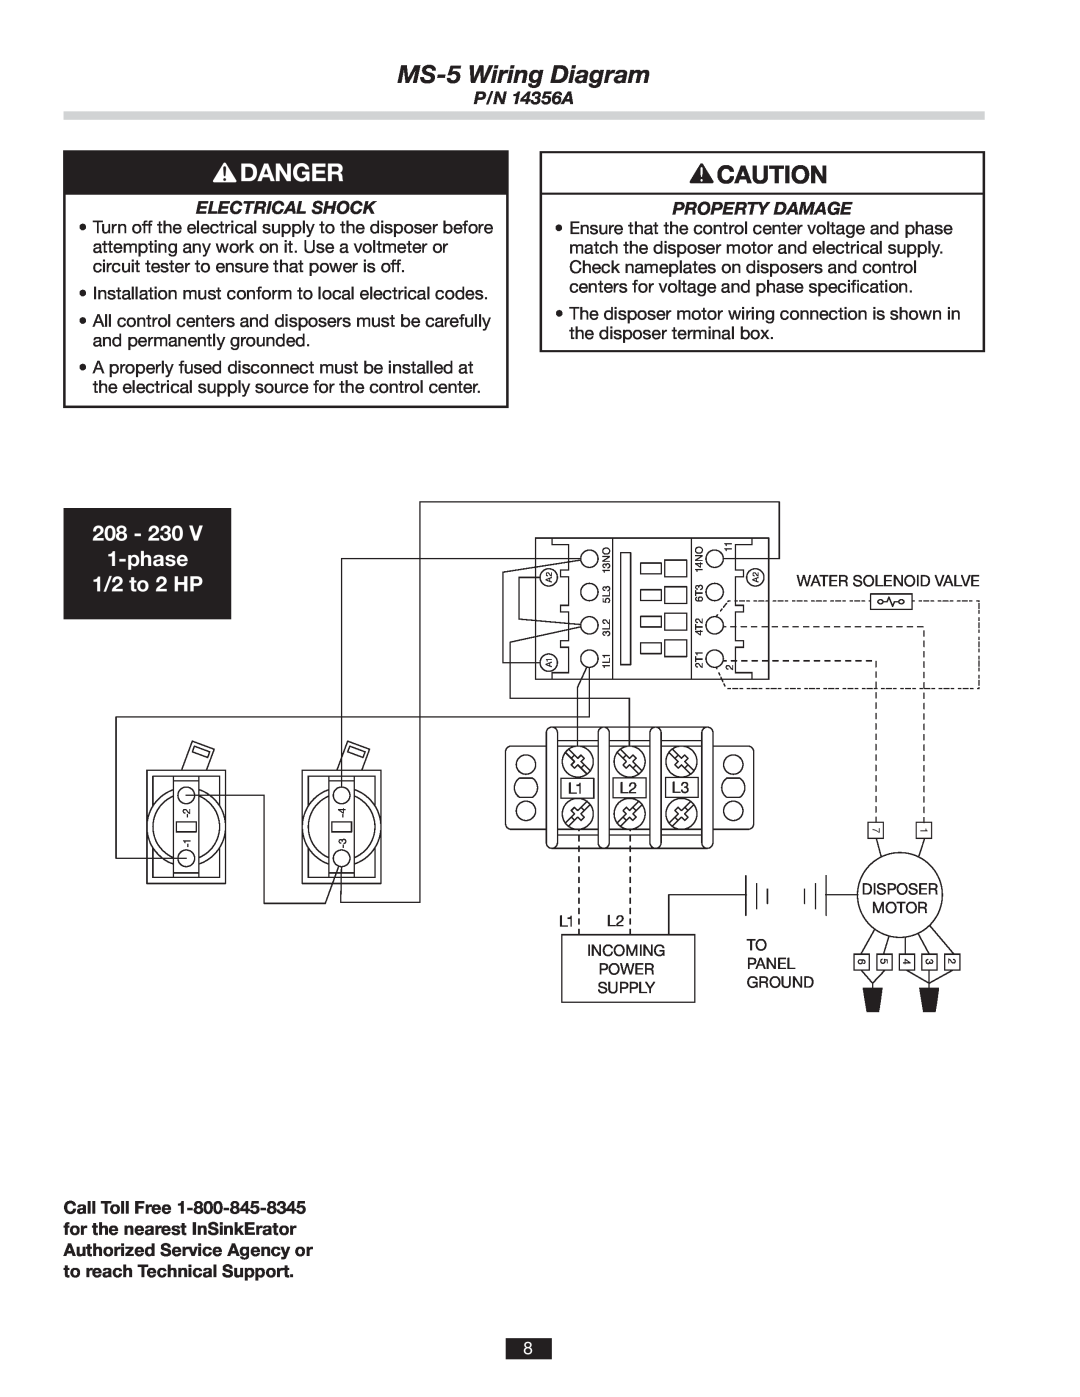 InSinkErator MS-5Wiring Diagram, 208 - 230 1-phase 1/2 to 2 HP, P/N 14356A, Electrical Shock, Property Damage 